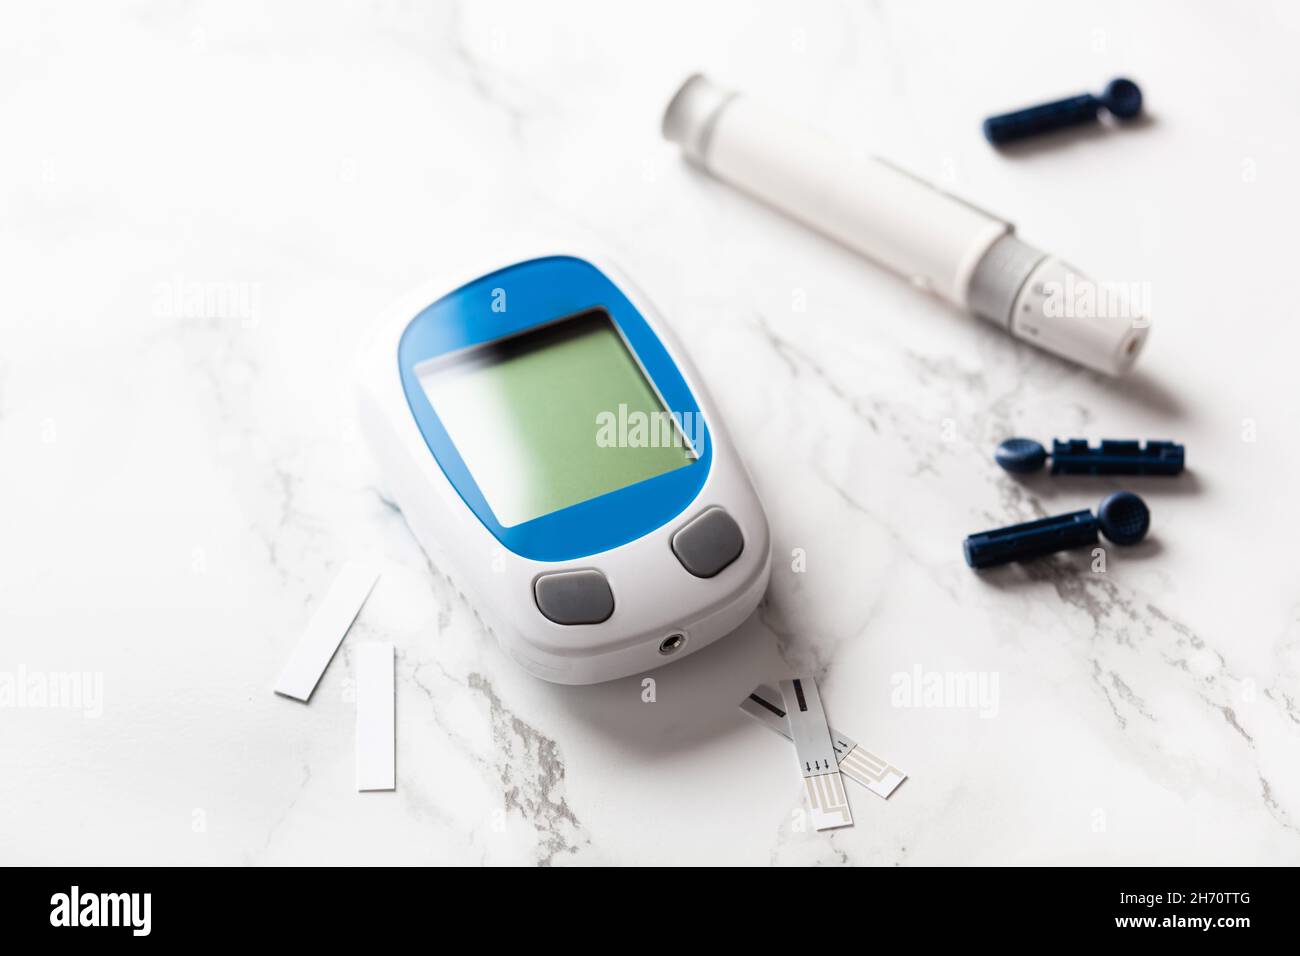 glucometer ketometer lancet and strips for self-monitoring of blood glucose or ketones level. diabetes or keto diet Stock Photo